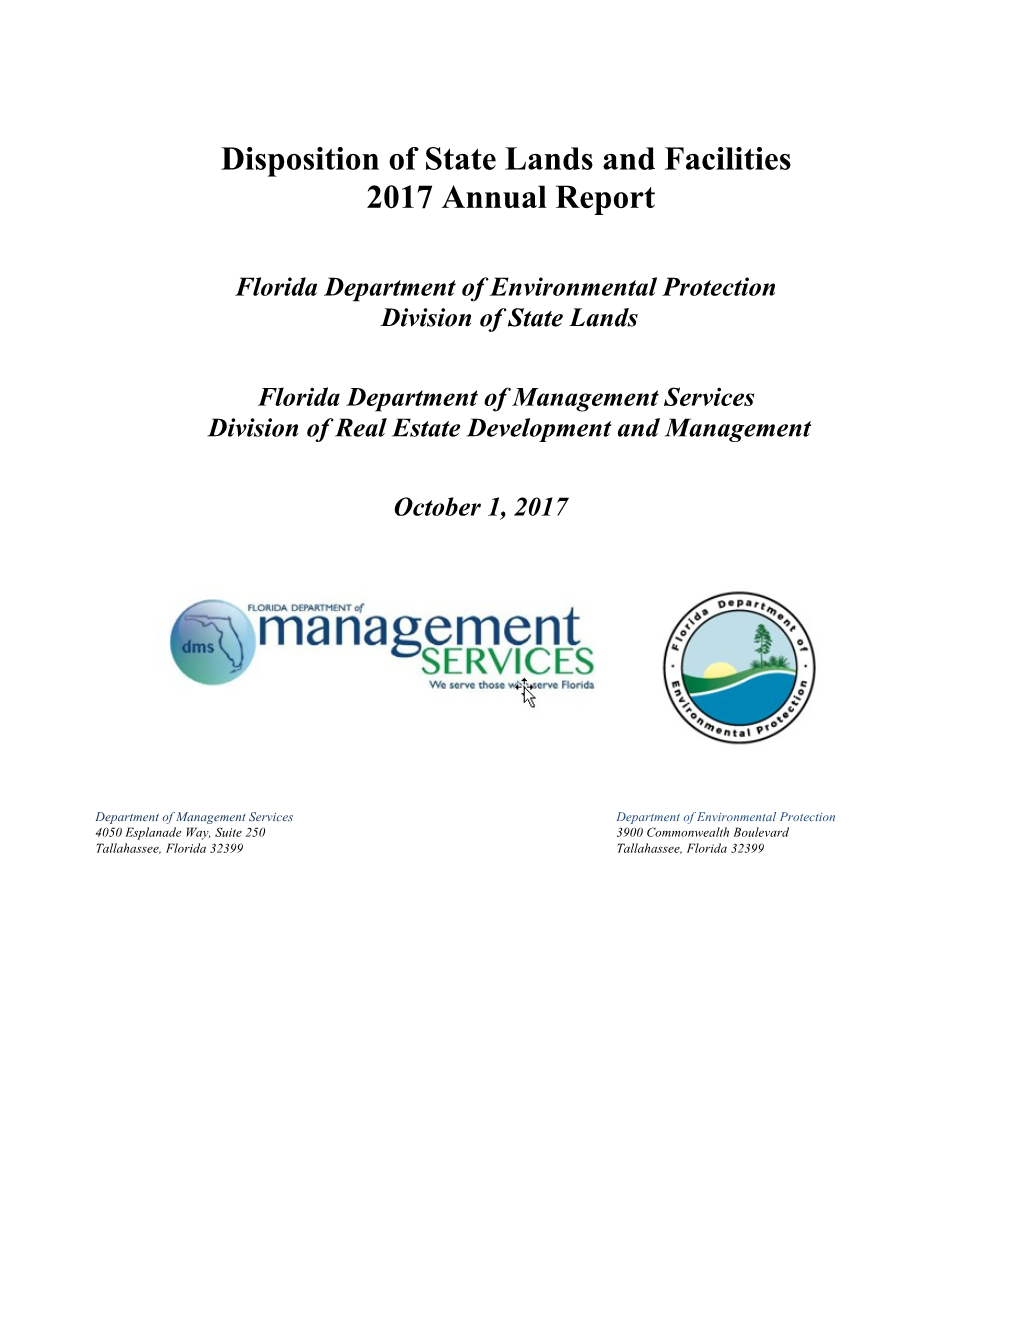 Disposition of State Lands and Facilities 2017 Annual Report